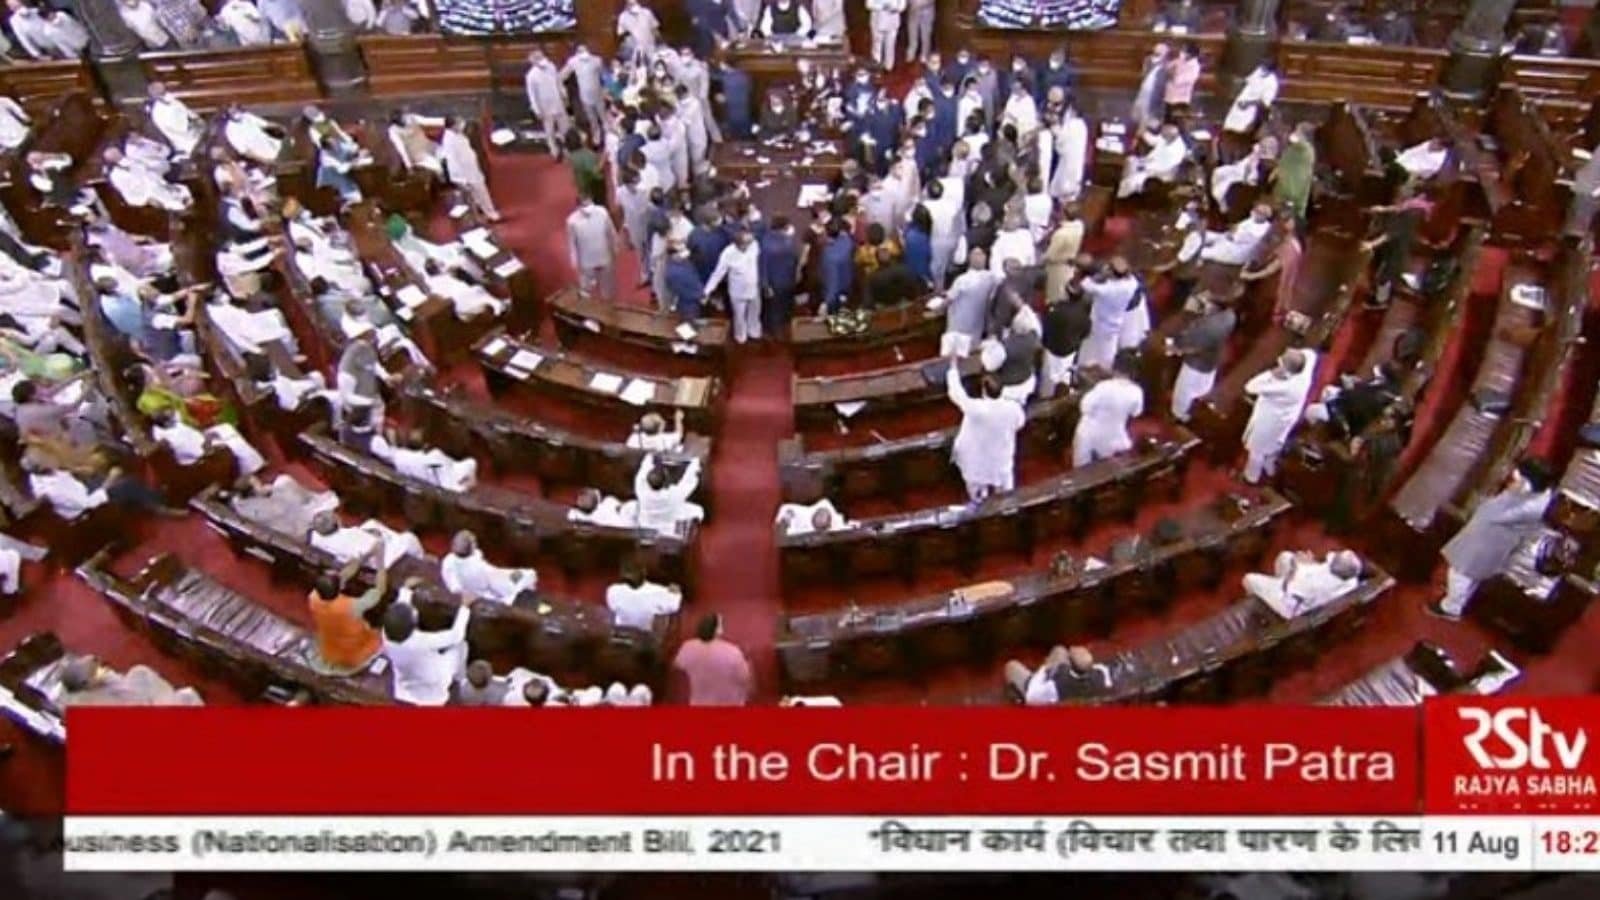 Guard Strangled, Women Attacked': Wild Accusations, Drama as Monsoon Session Ends With Din-full Day